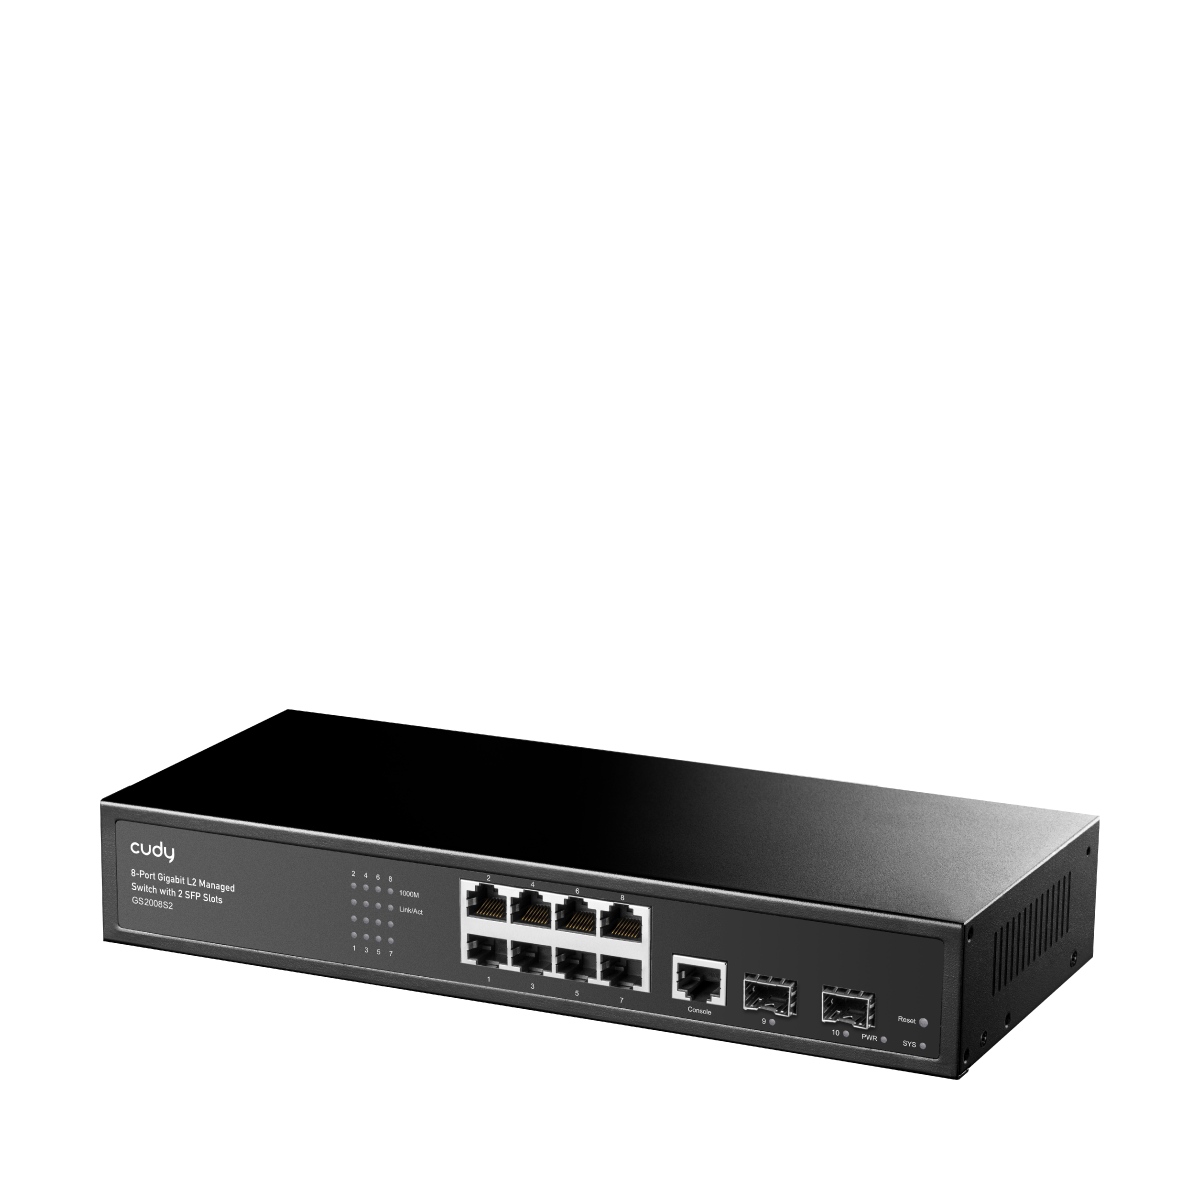 8-GbE 2-SFP L2 Managed Gigabit Switch, GS2008S2 1.0